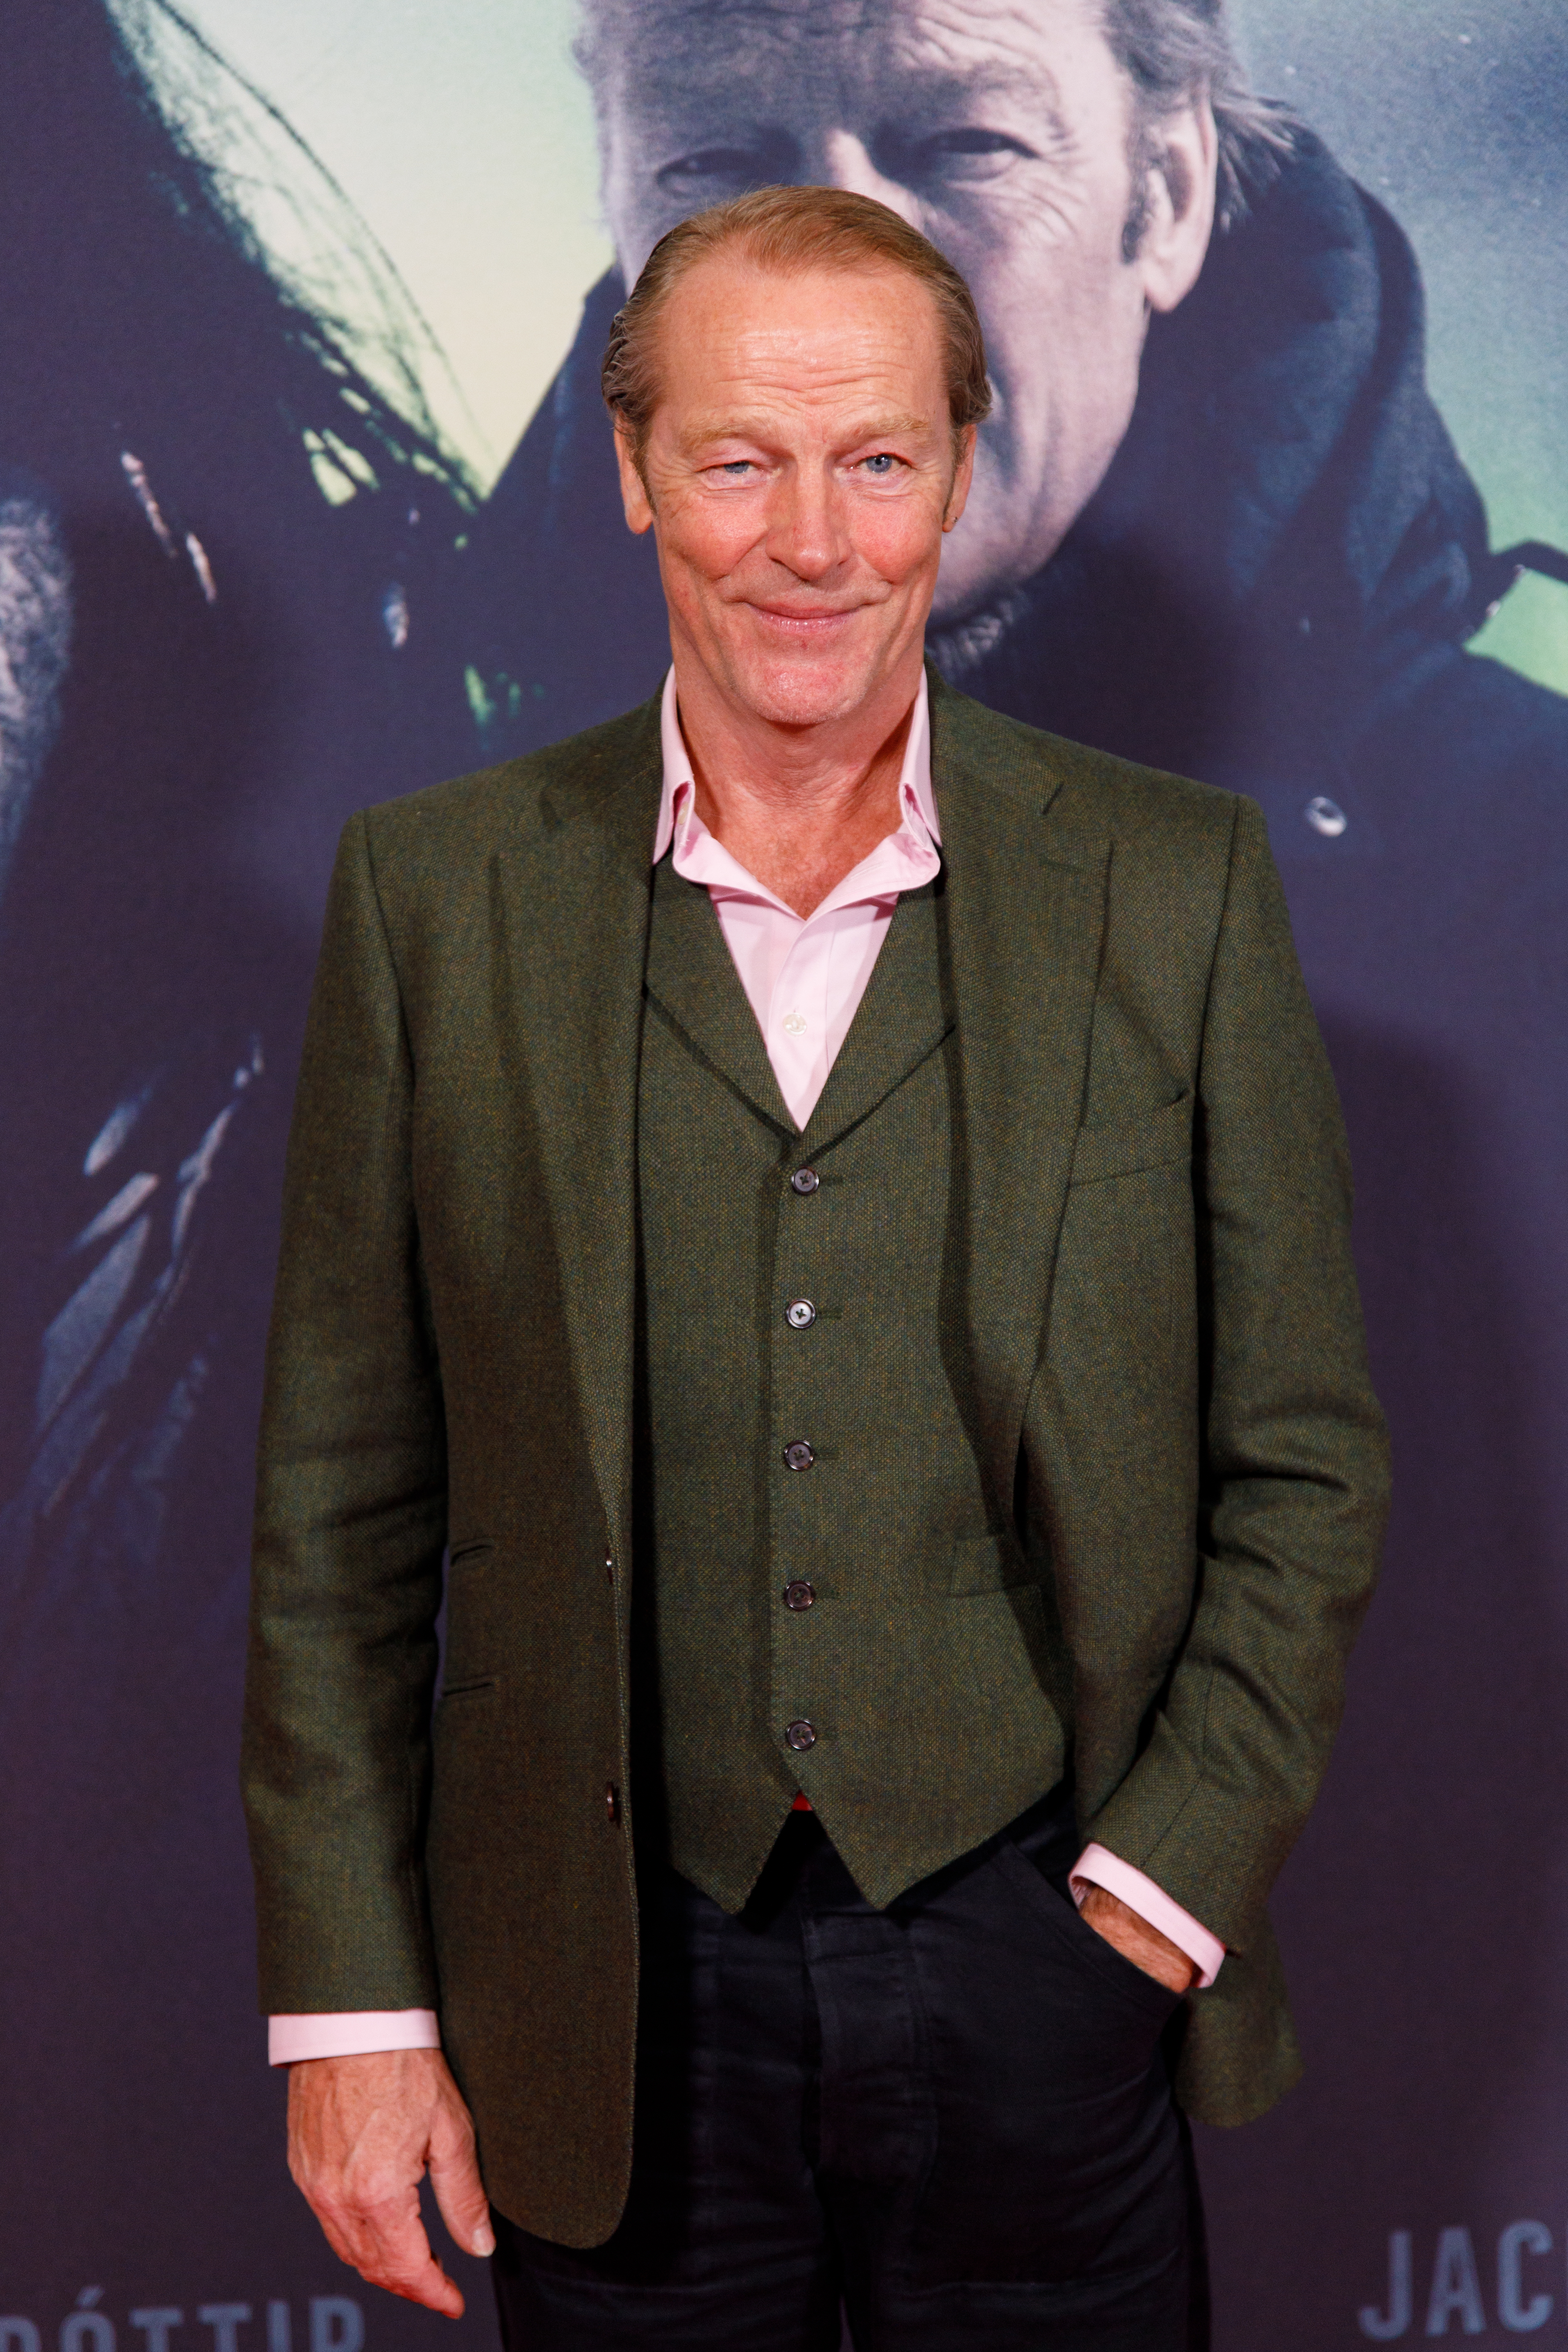 Iain Glen at the premiere of "Gletschergrab" on March 03, 2023, in Cologne, Germany. | Source: Getty Images